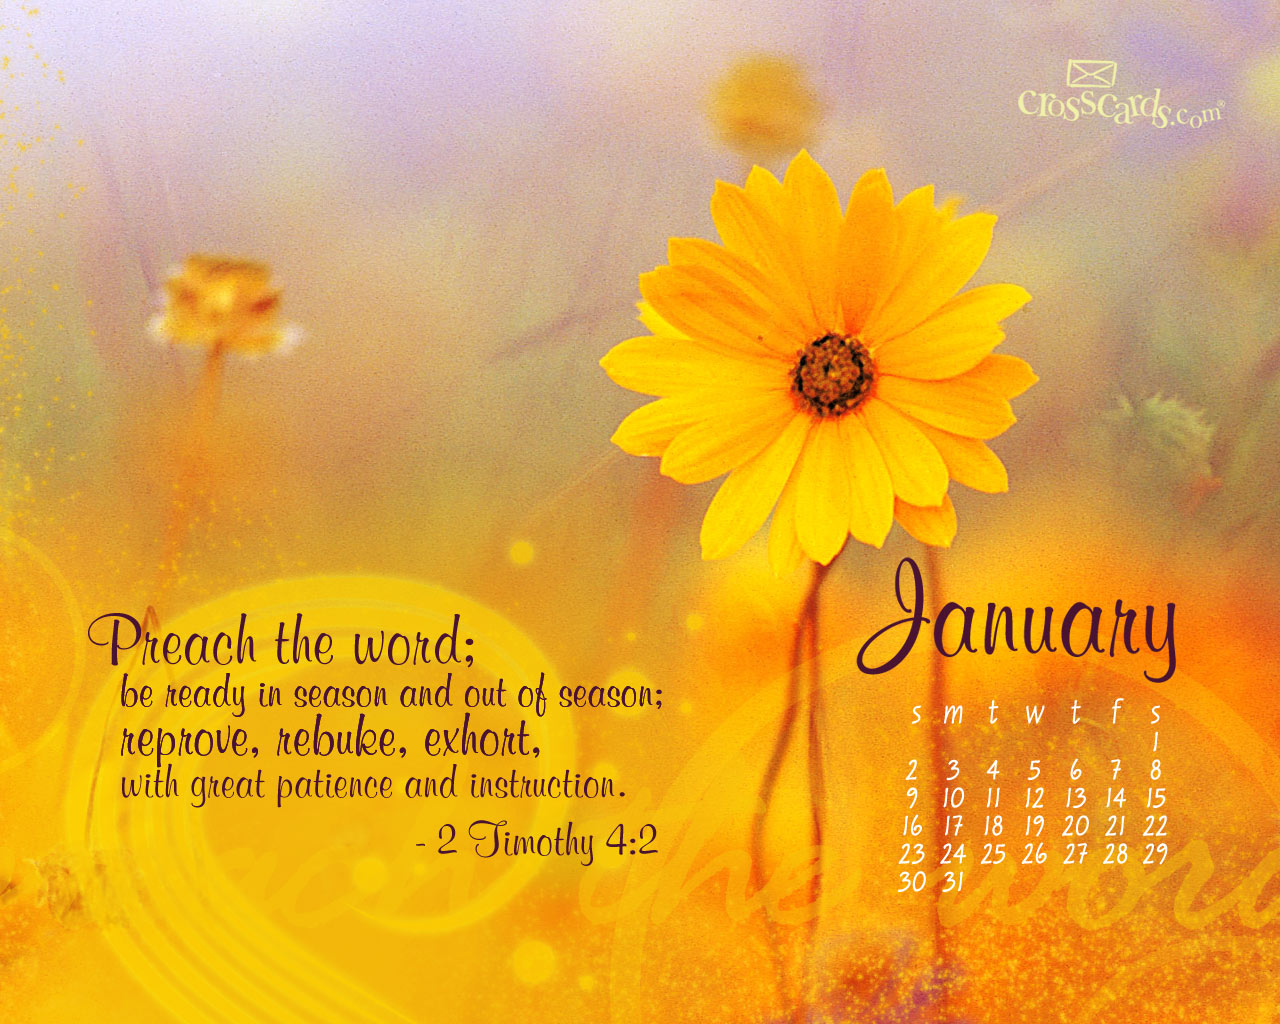 Crosscards Wallpaper Monthly Calendars January